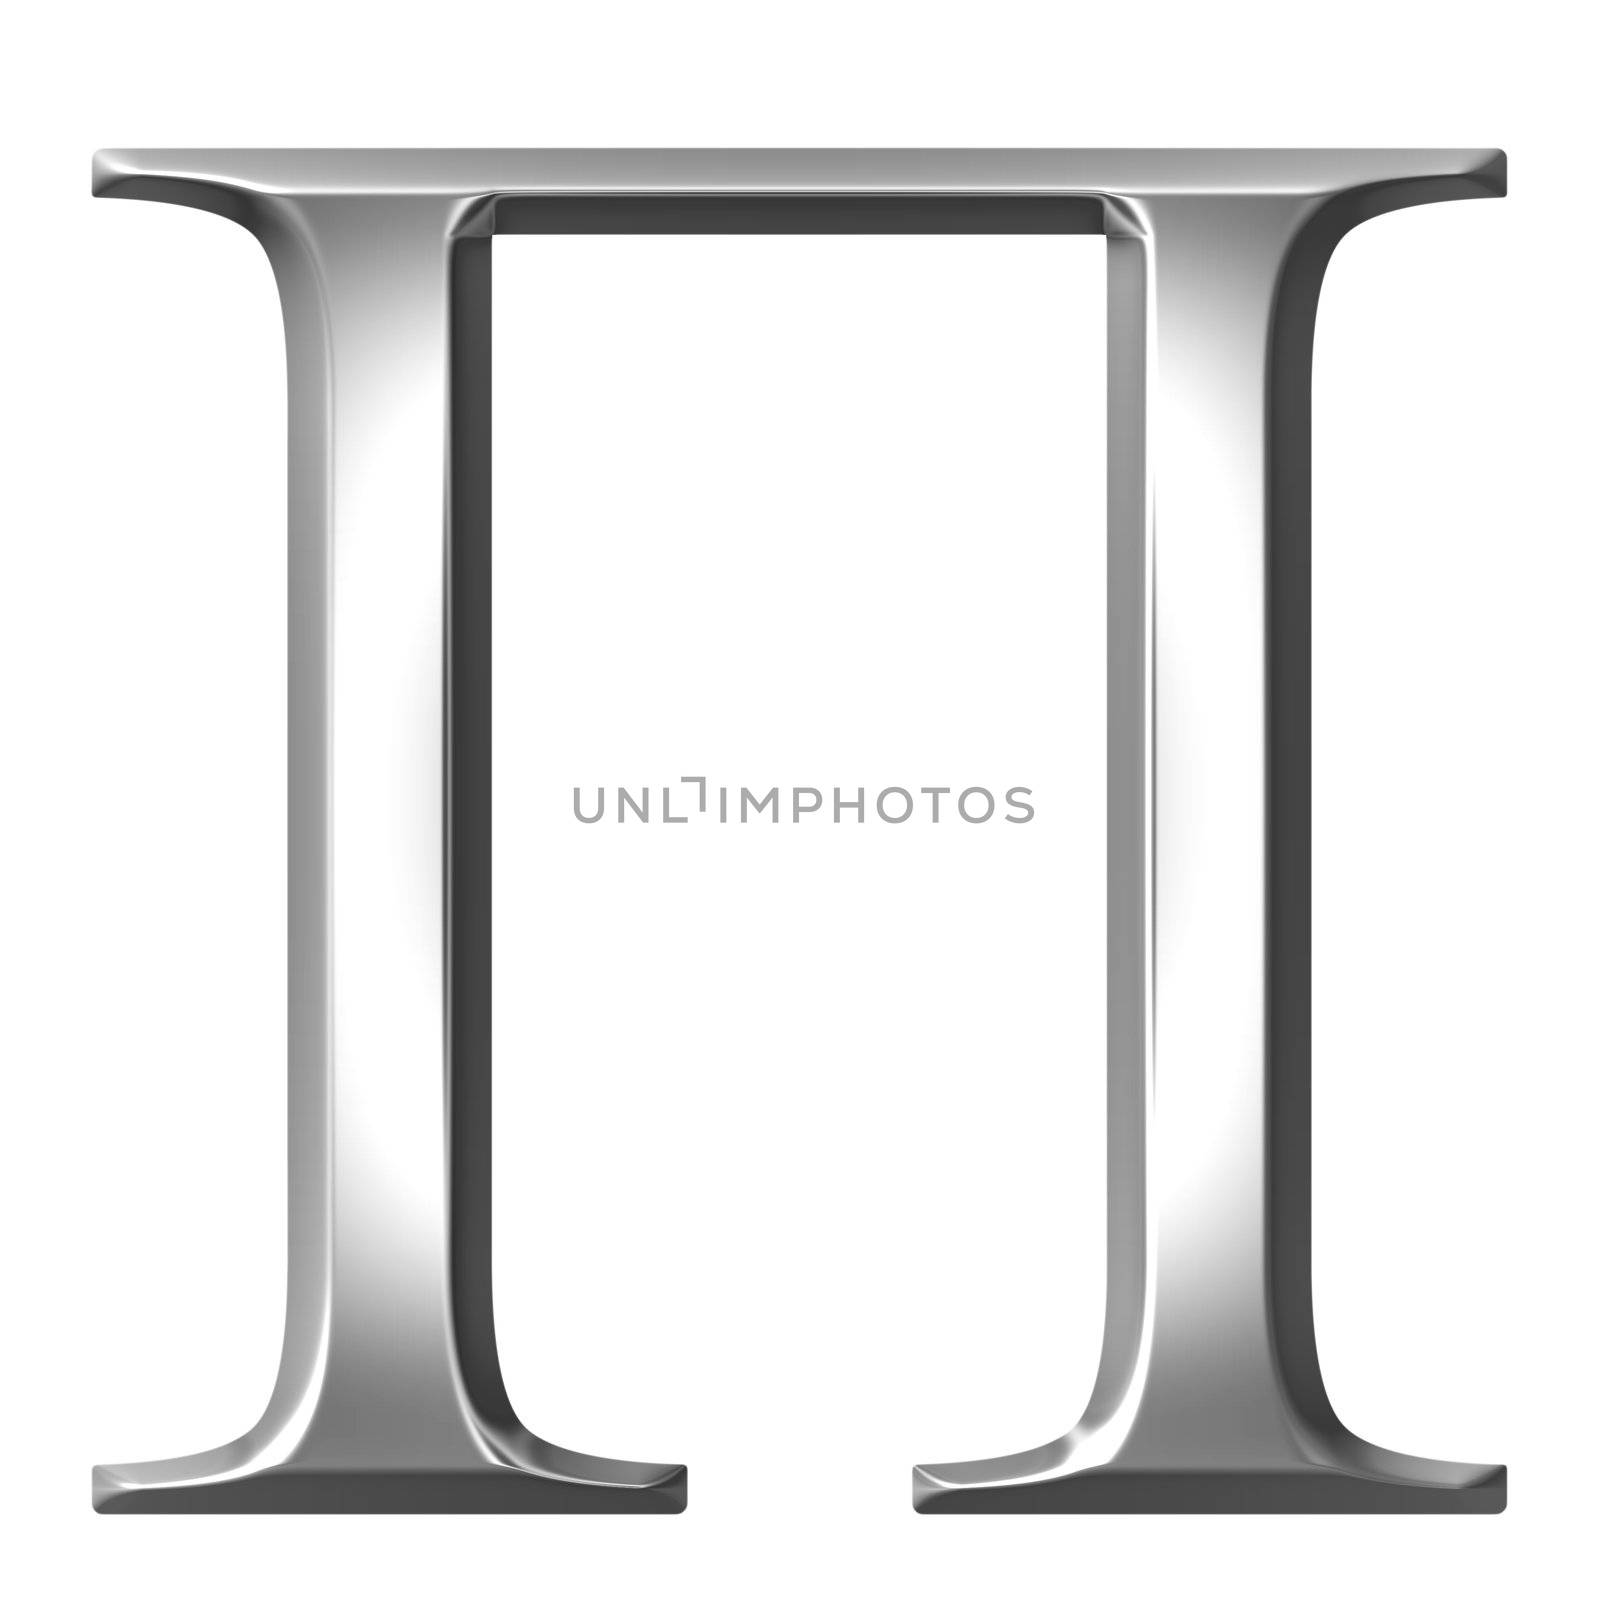 3d silver Greek letter Pi isolated in white